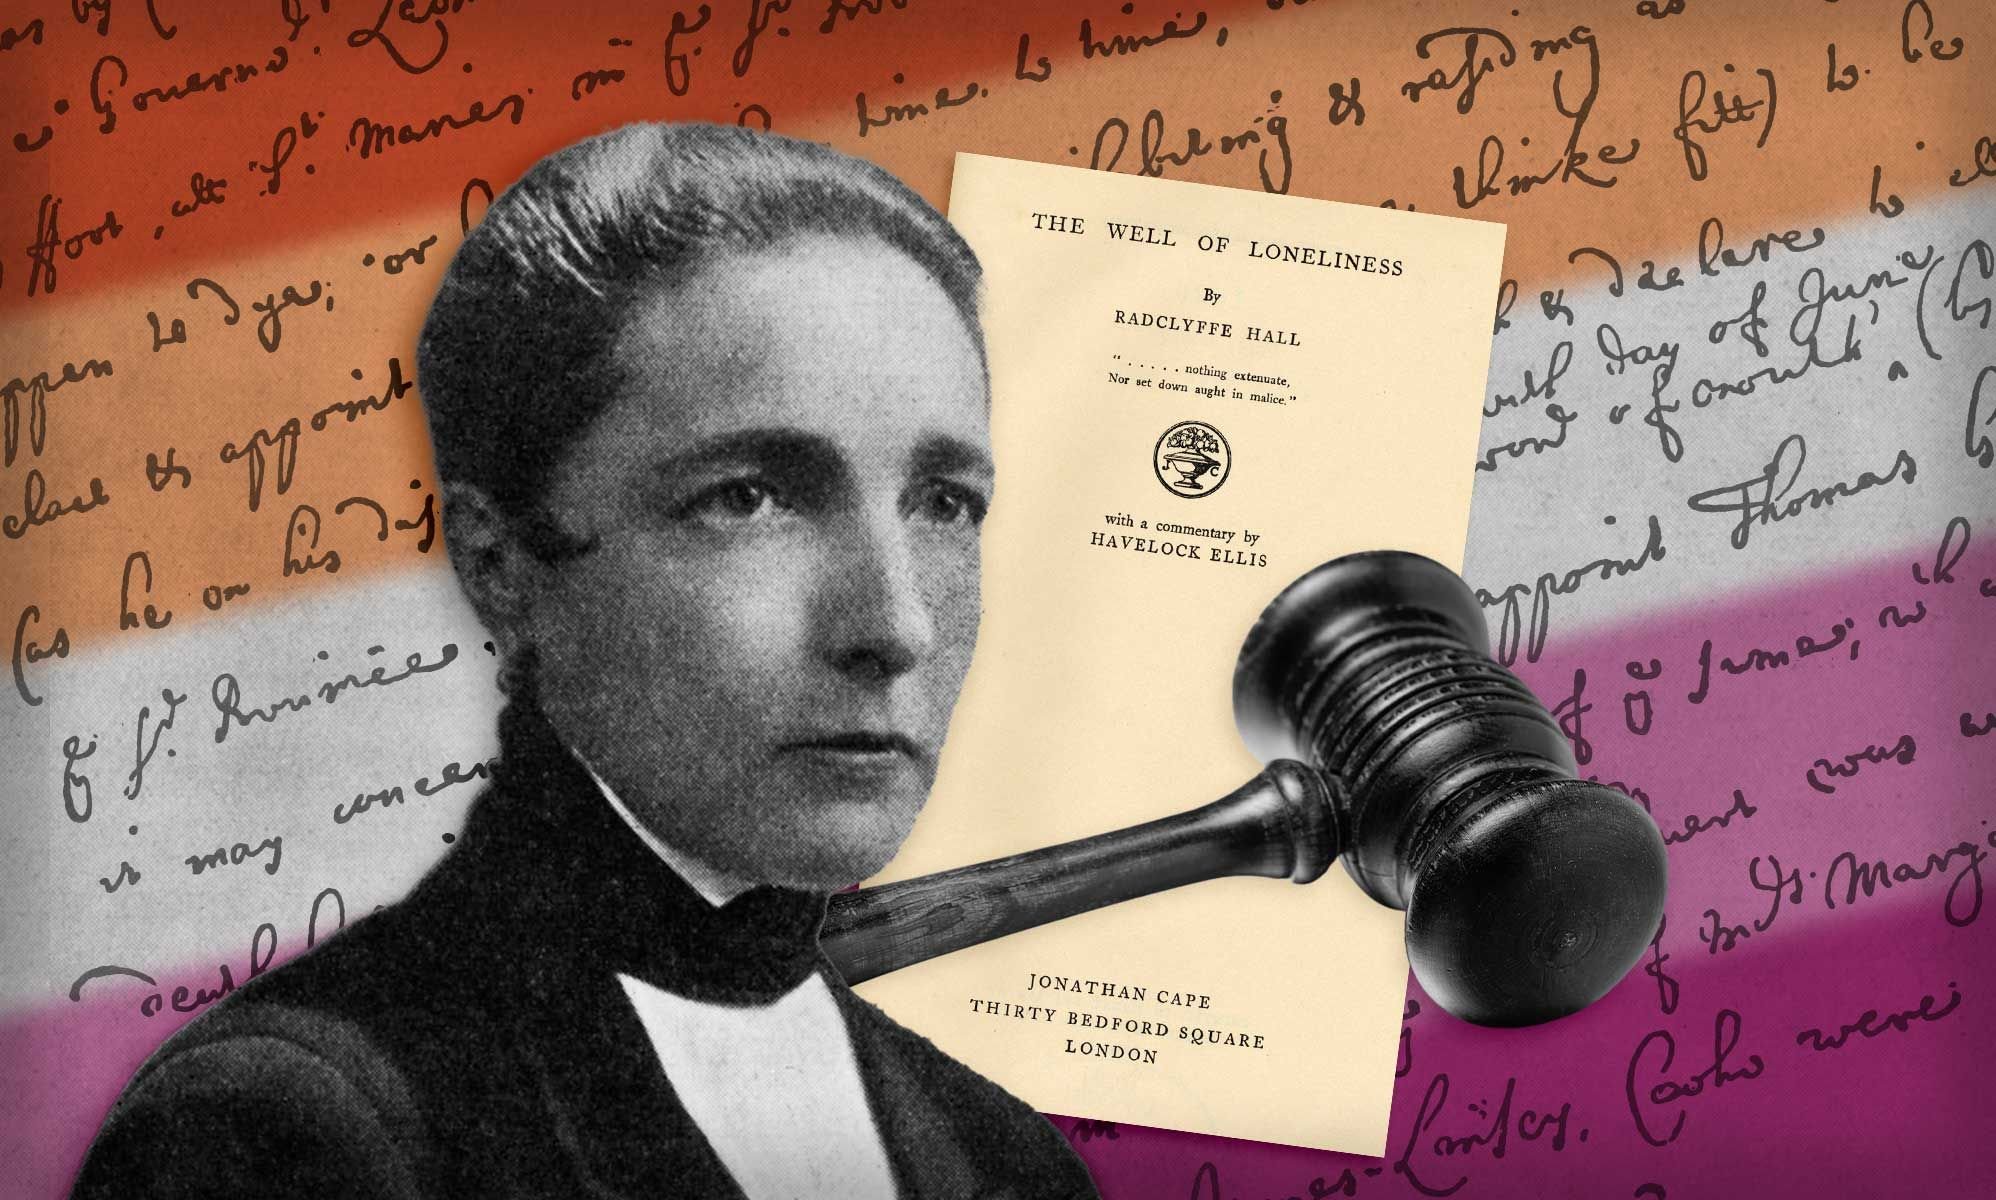 Revisiting Radclyffe Hall’s groundbreaking lesbian novel The Well of Loneliness, 95 years on